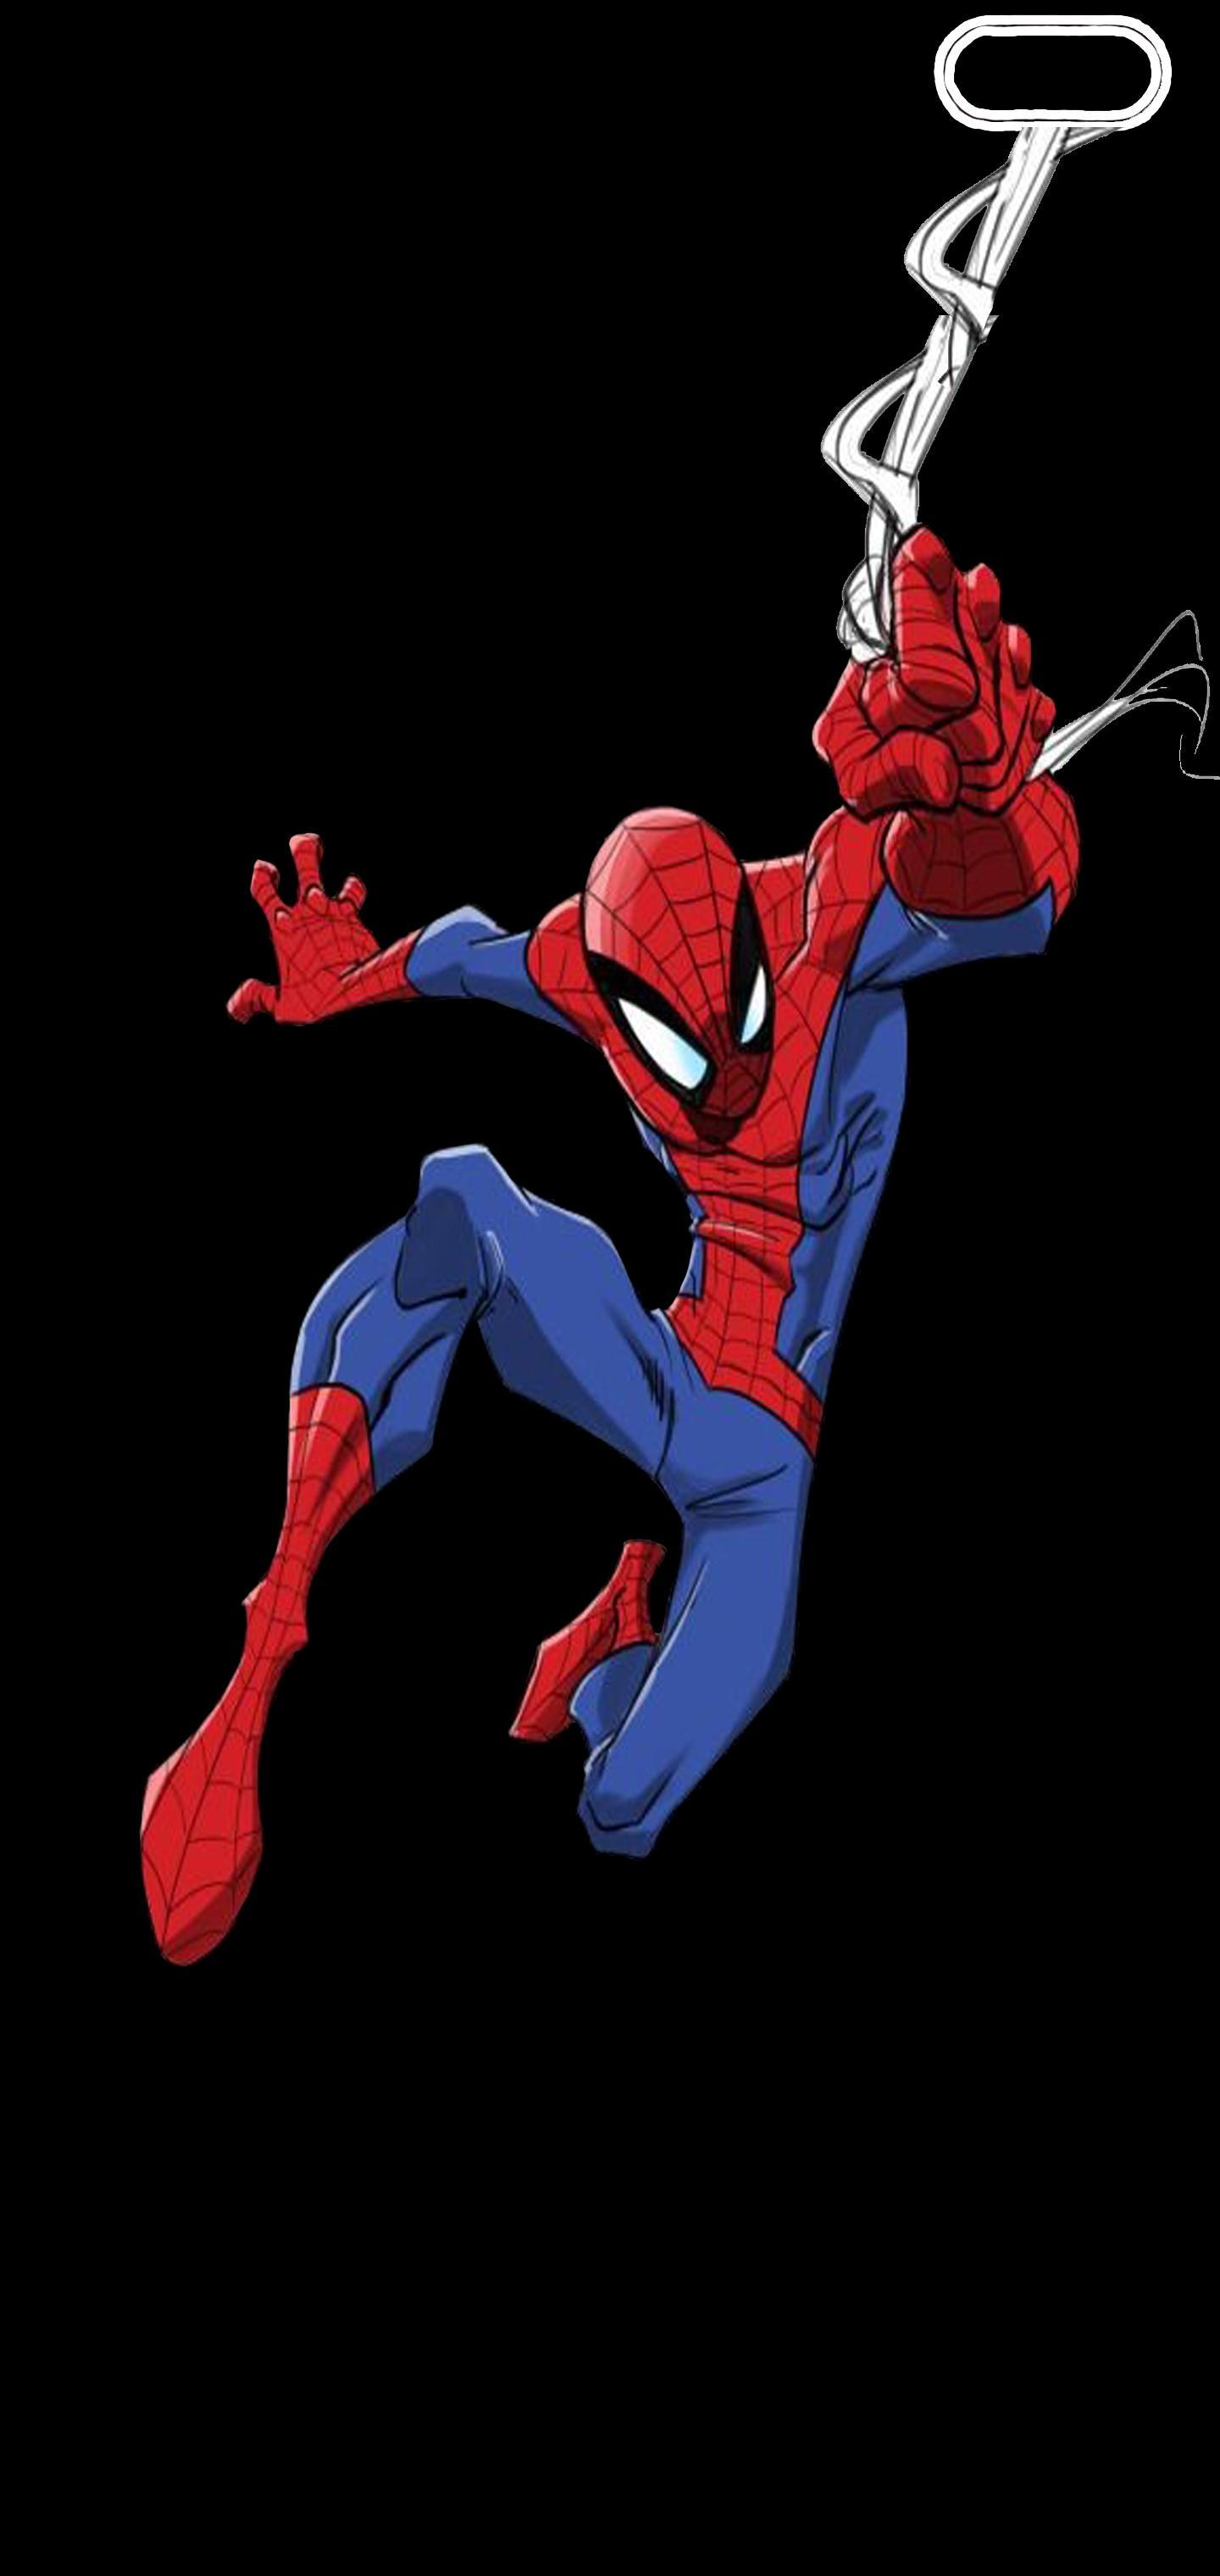 Web Slinging Spider Man By Bjs1023113 Galaxy S10 Hole Punch Wallpaper